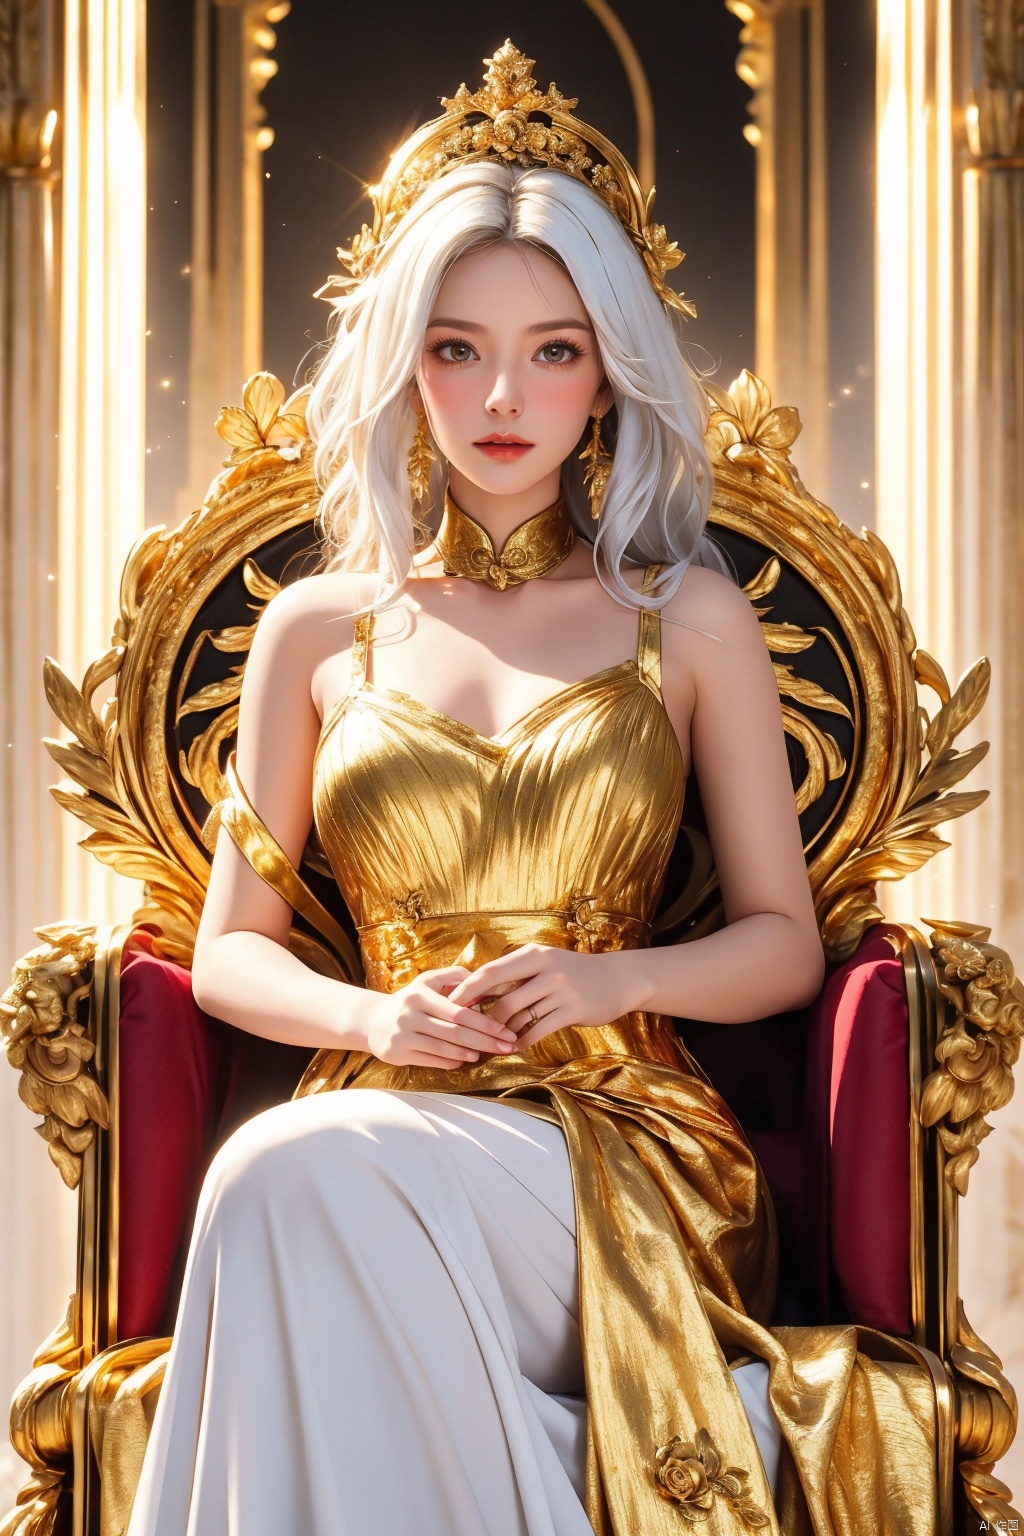 masterpiece, 1 girl, Look at me, Aphrodite, White hair, Greek dress, Palace, Sitting on the throne, resplendent, Lots of roses, gilded, MYTHOS, Gold powder, Golden glow, textured skin, super detail, best quality, 16k